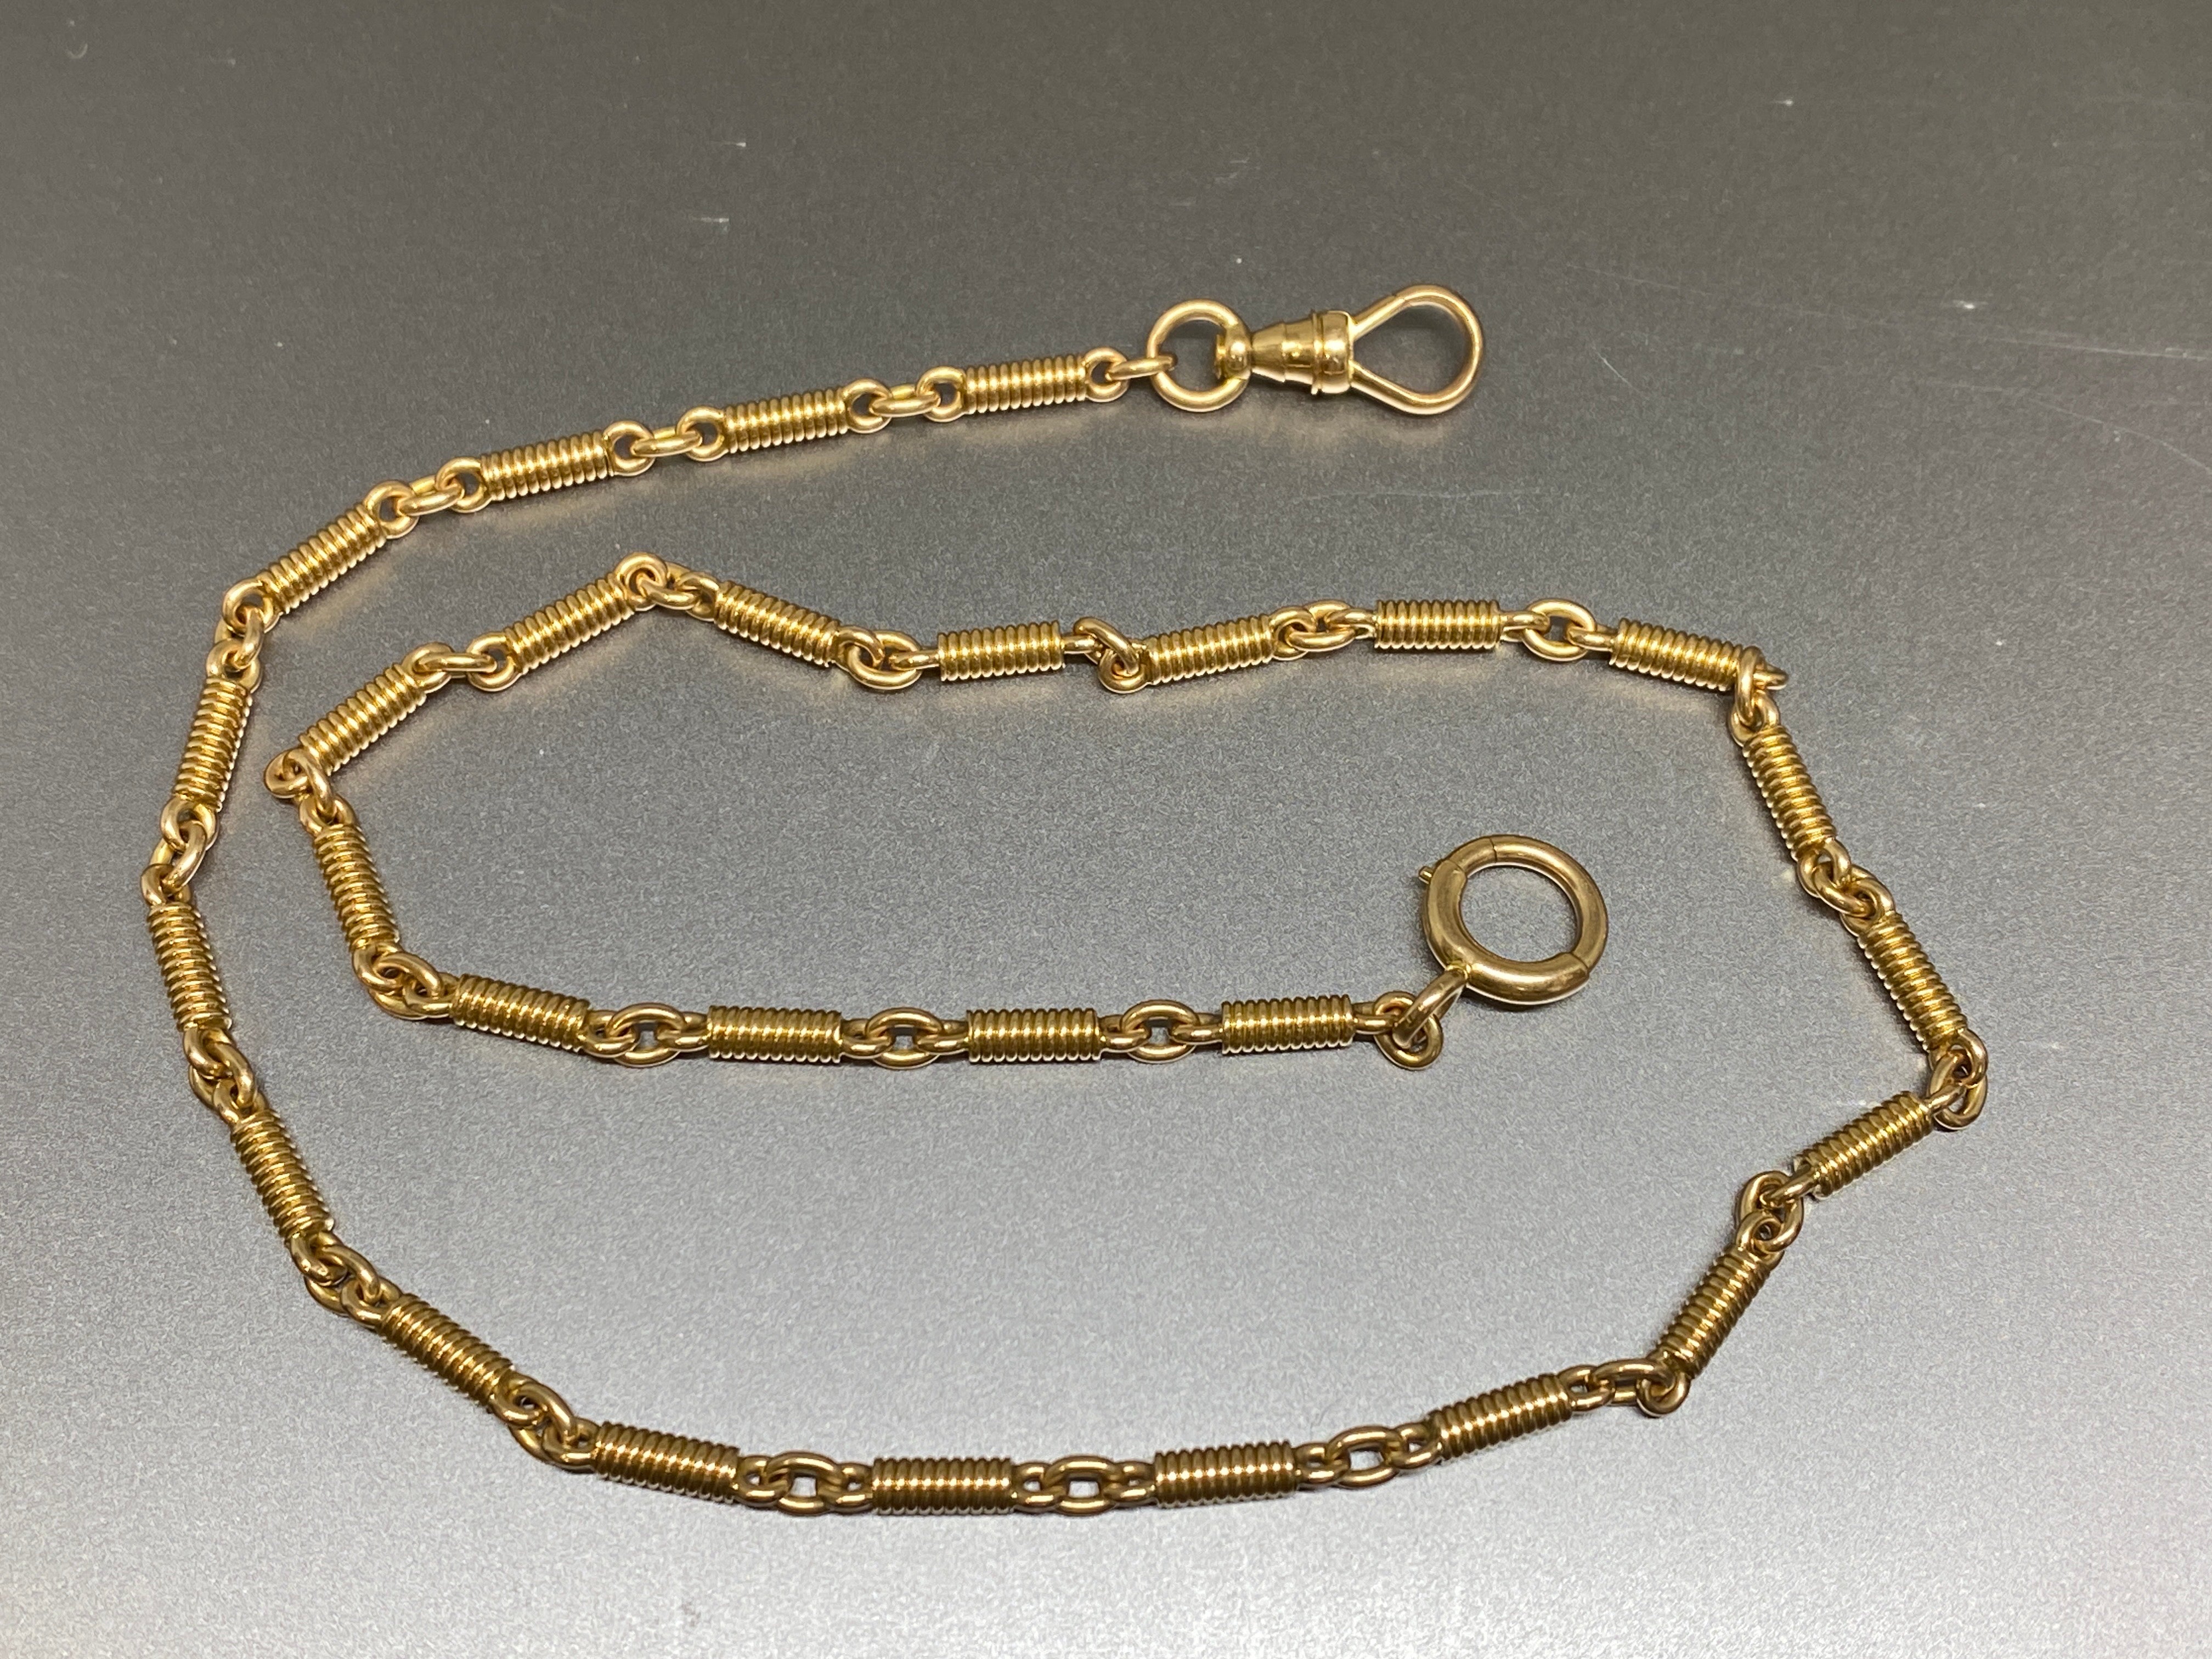 This late 19th century fancy link watch chain has been crafted in solid 14k gold.  It is a stunning warm rosy-yellow gold and consists of special, unusual fancy links that look like tightly coiled spiral springs. The watch chain is fitted on one end